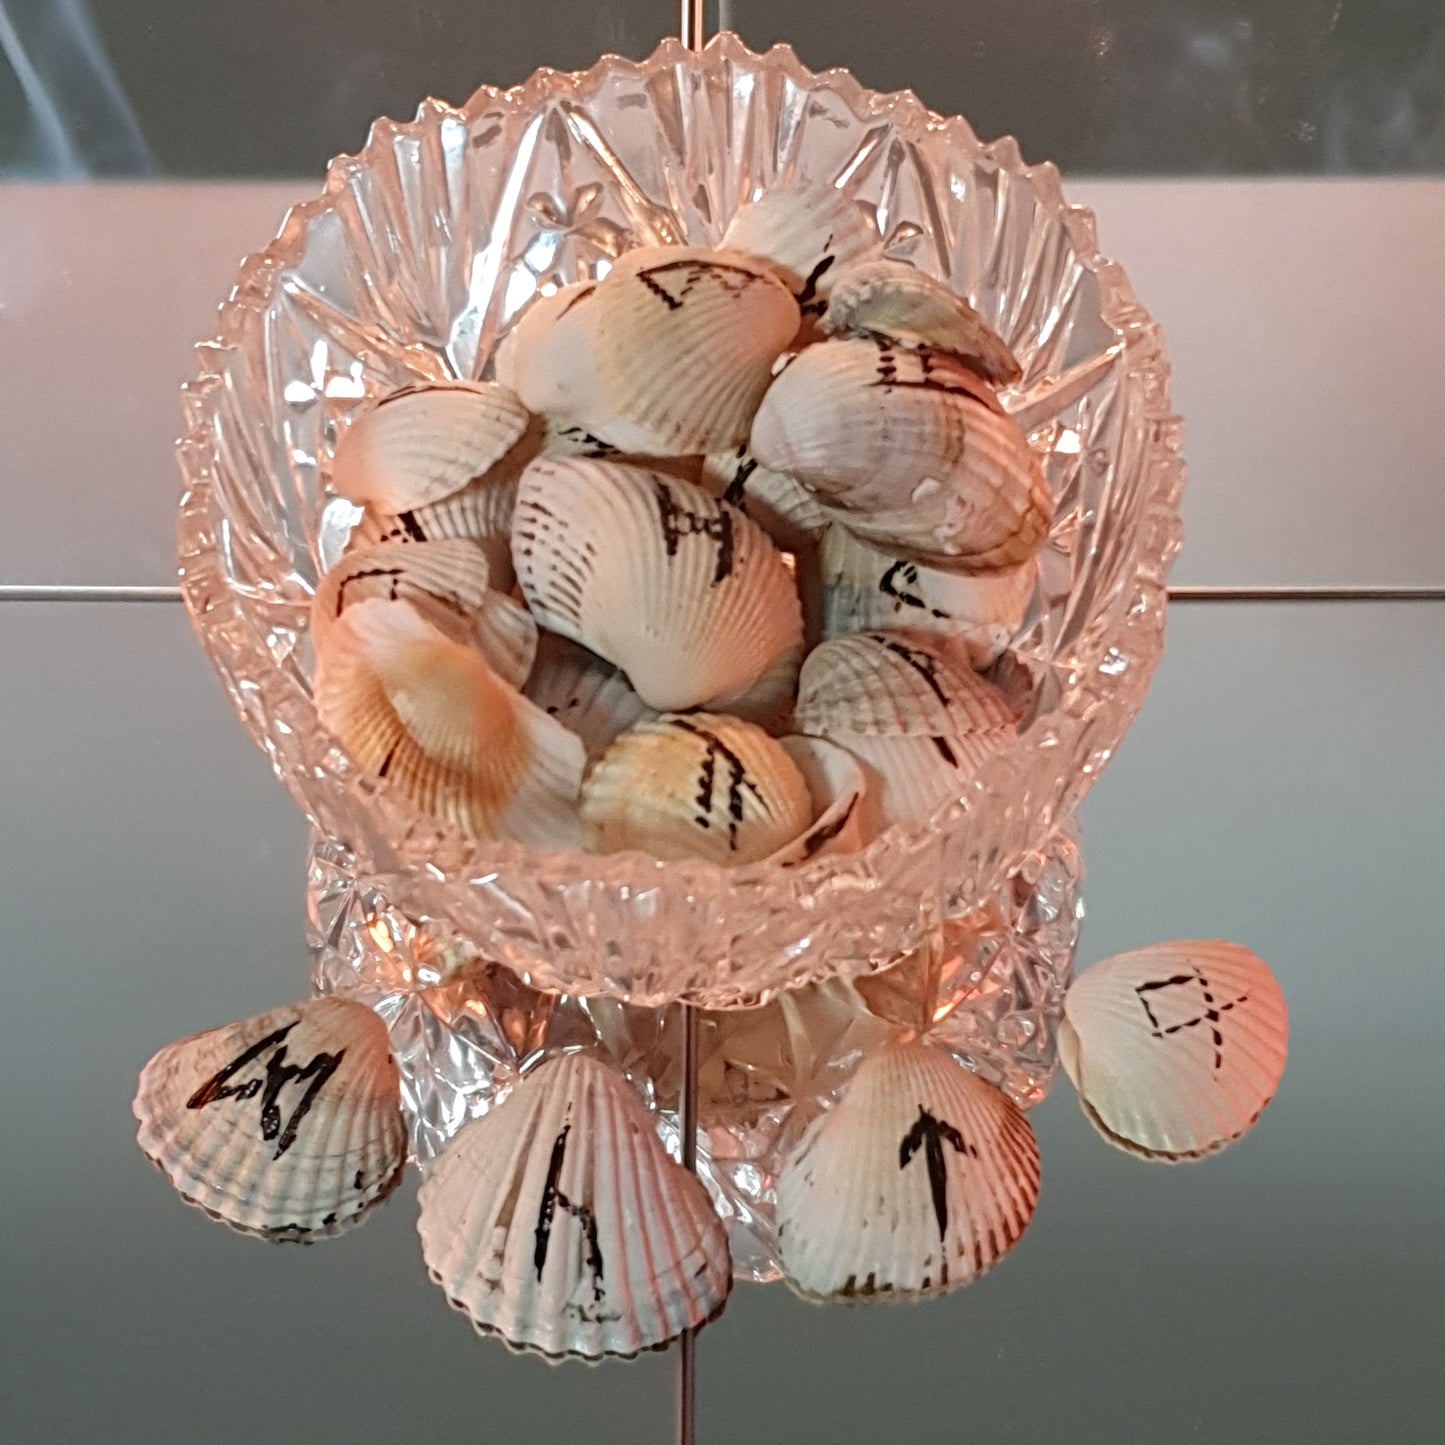 Shells with runes